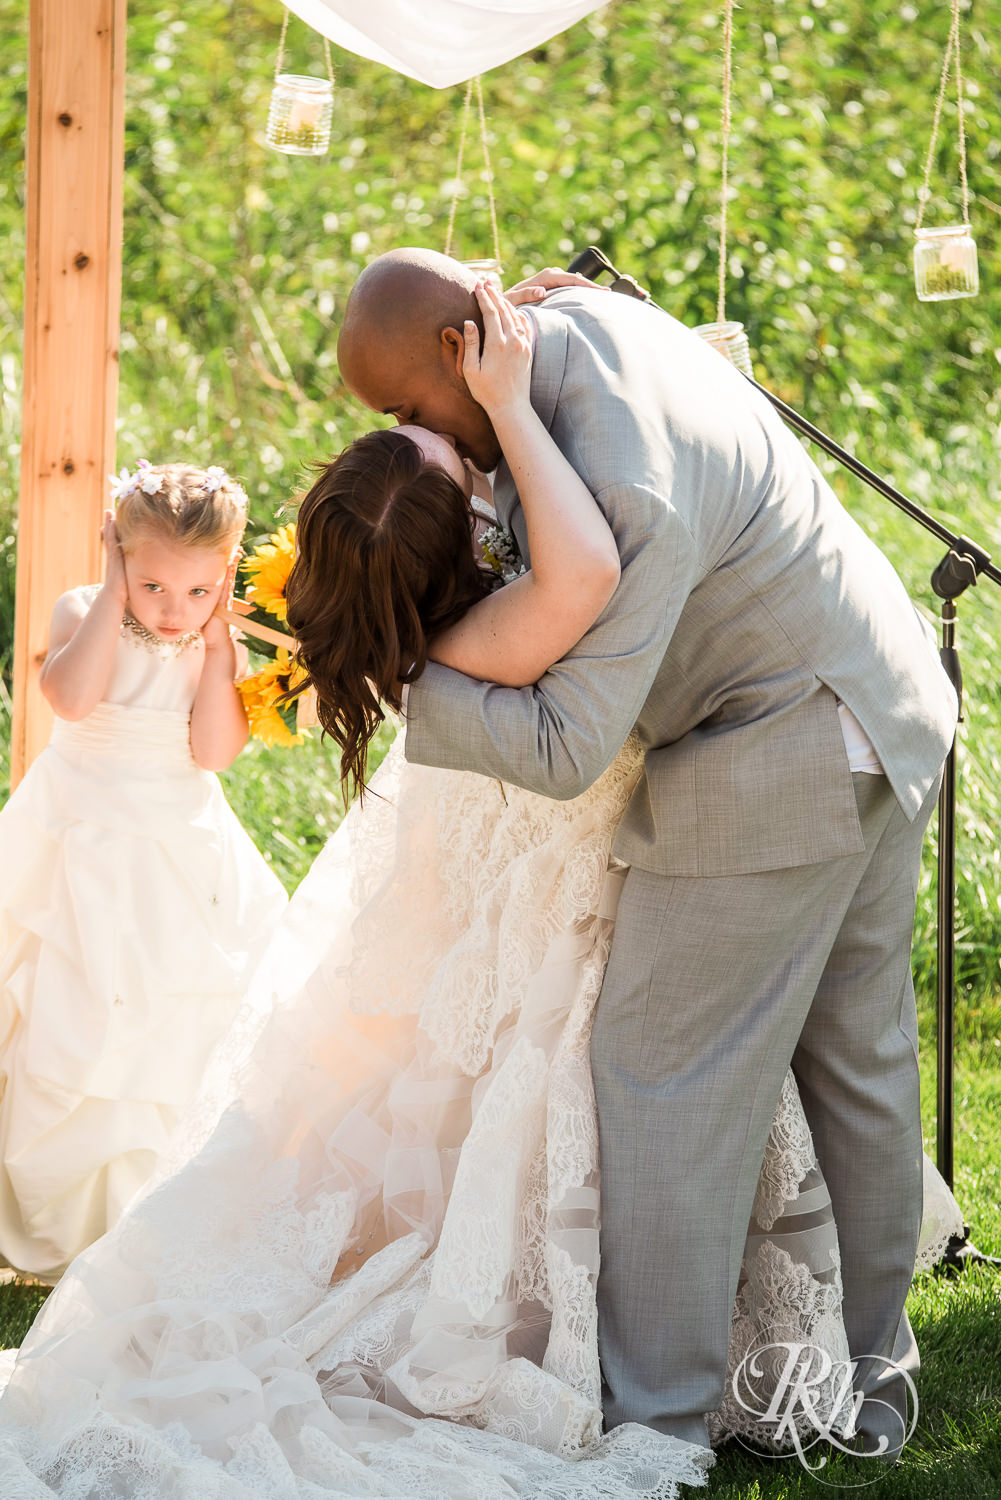 Bride and Asian groom kiss during barn wedding ceremony at Birch Hill Barn in Glenwood City, Wisconsin.